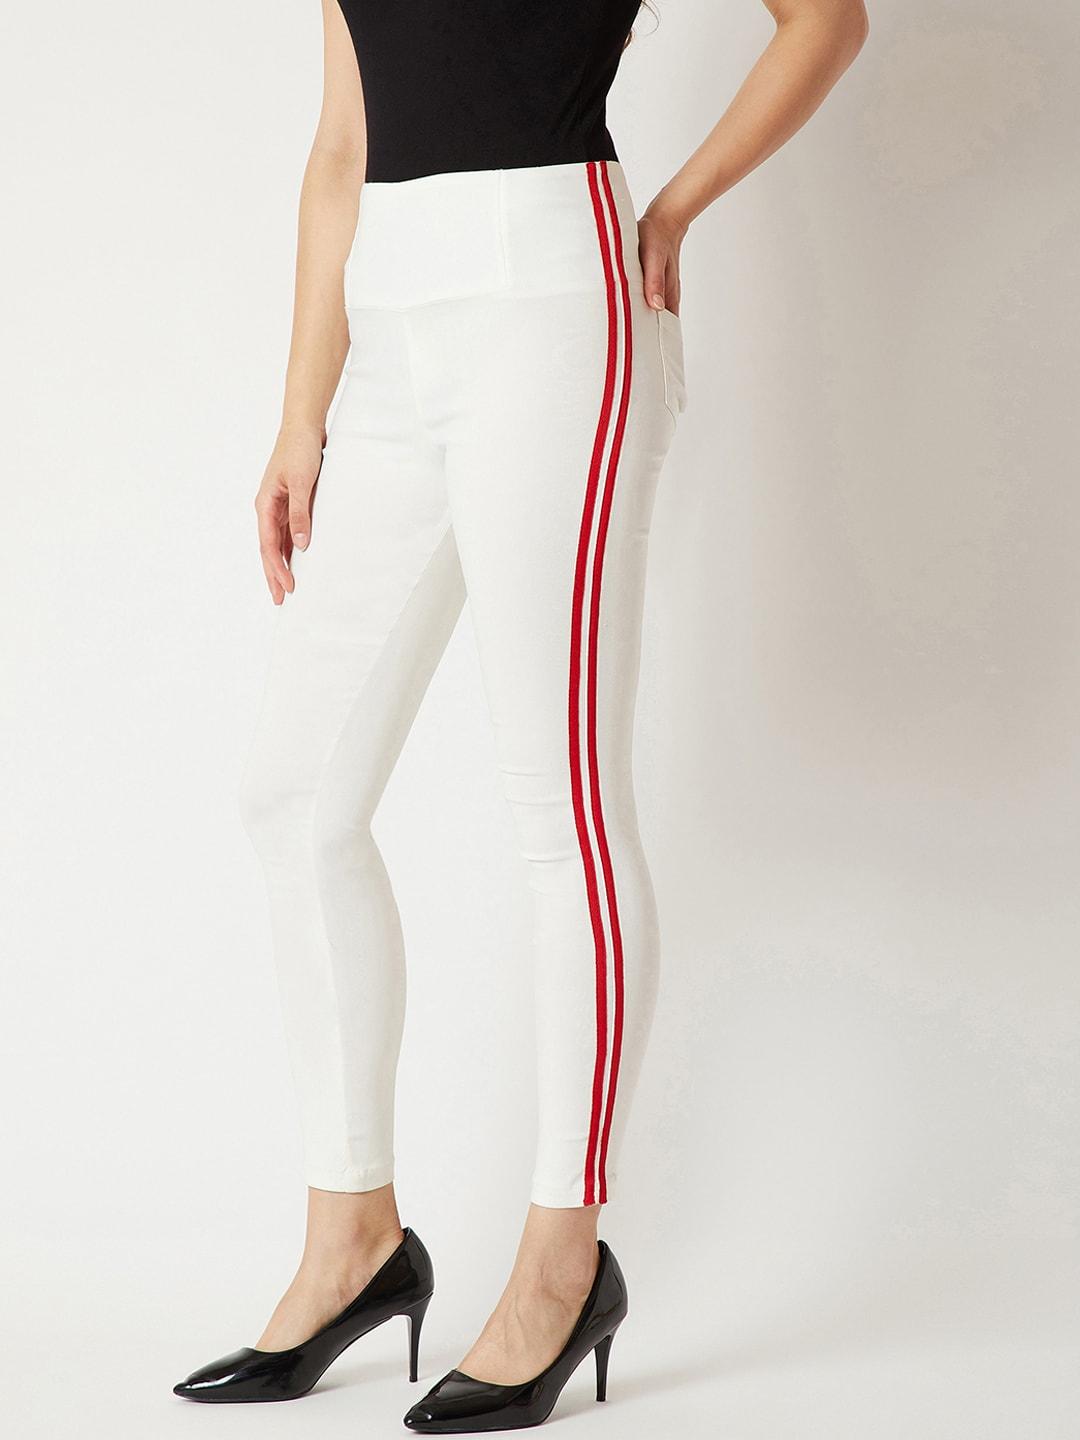 miss-chase-women-white-solid-hight-waist-slim-fit-jeggings